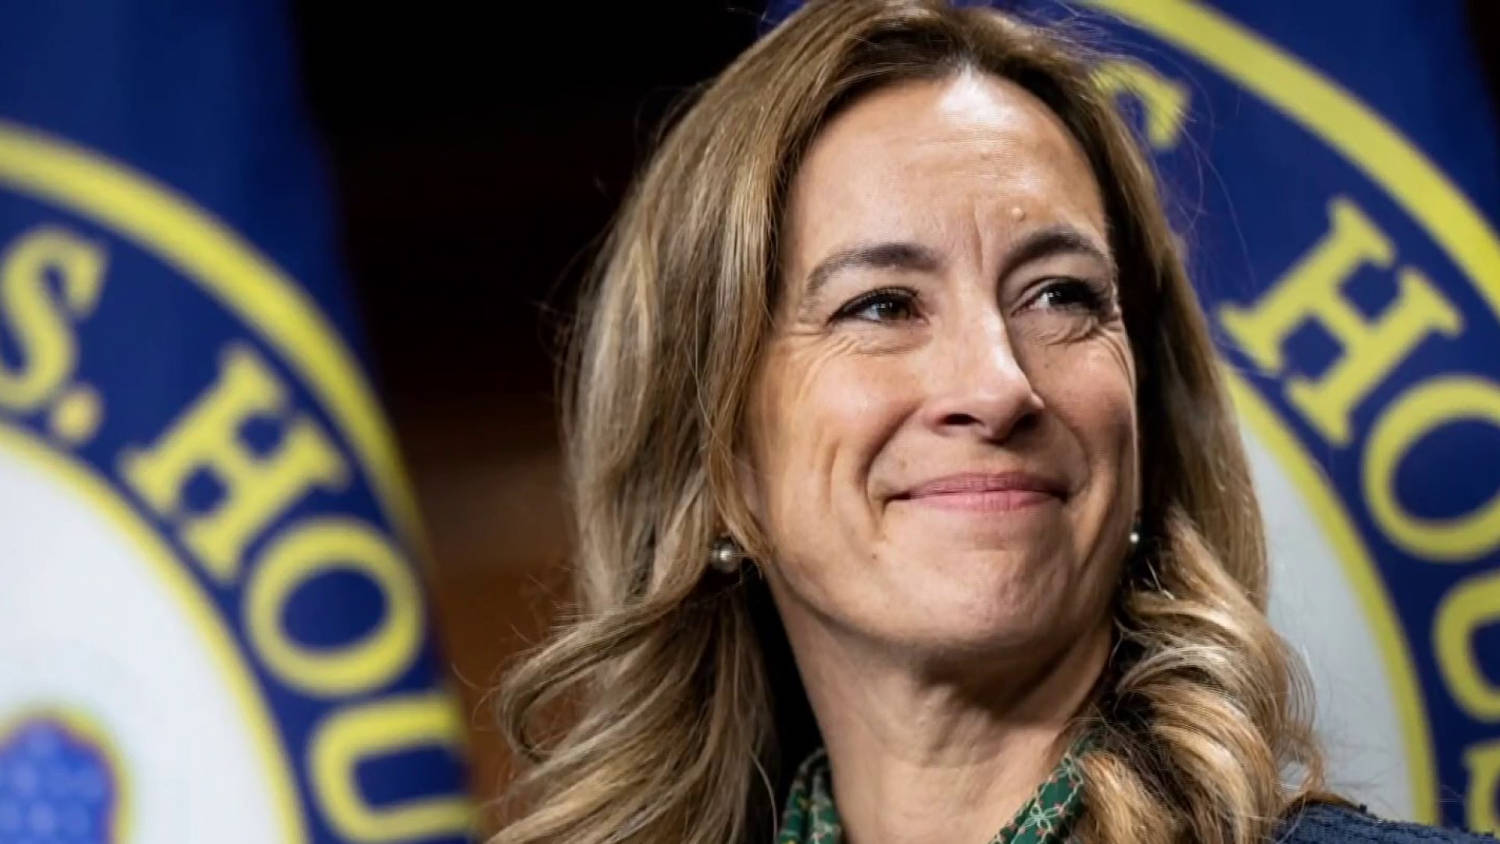 Rep. Mikie Sherrill calls on Biden to withdraw from presidential race